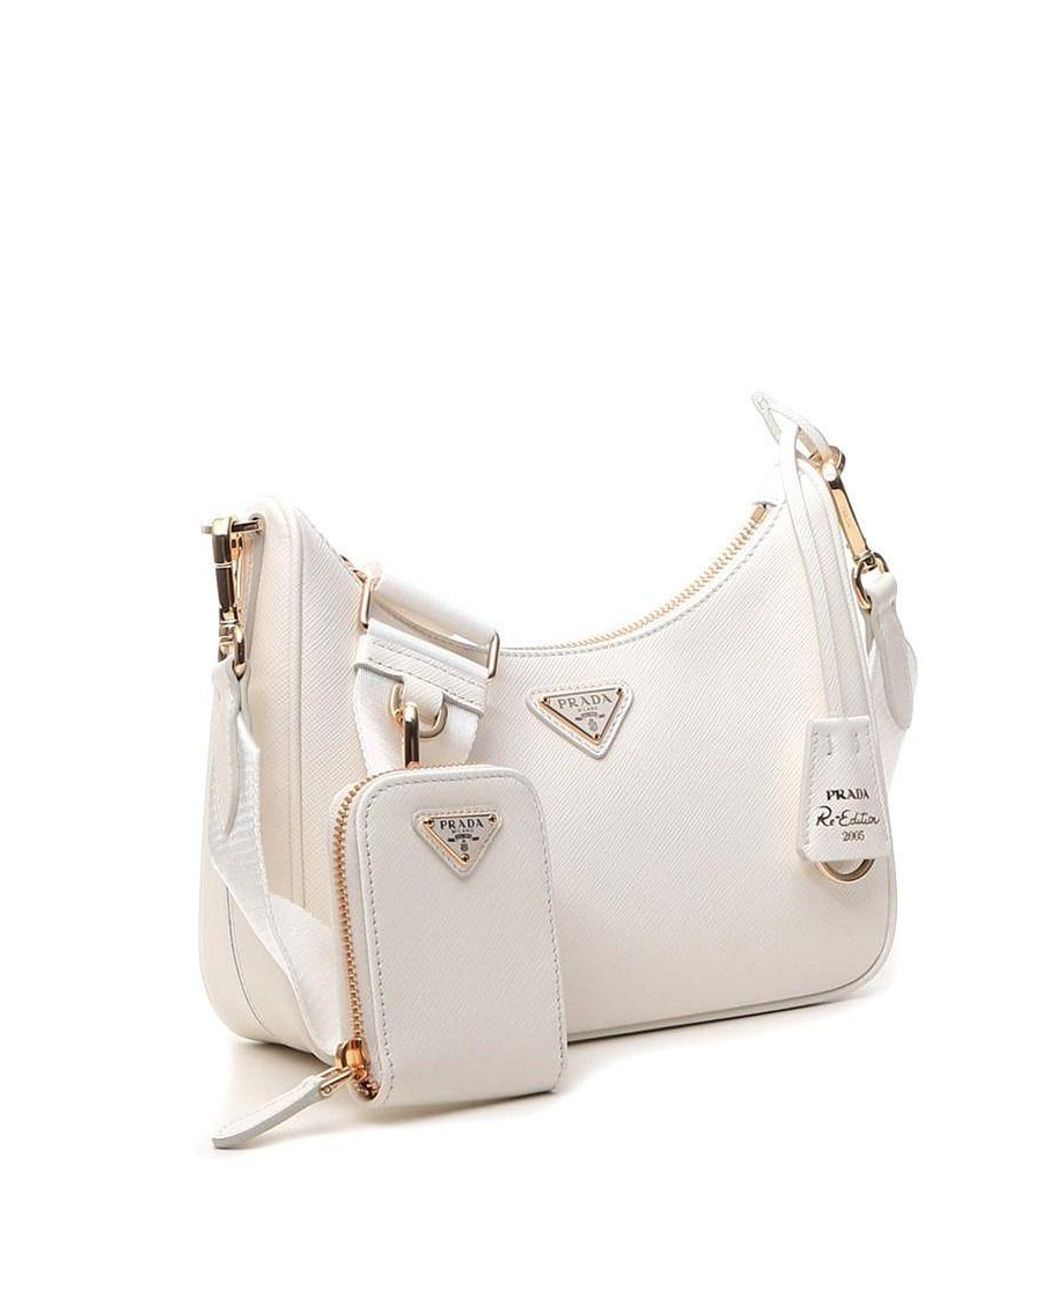 How I would style my white saffiano leather Prada re-edition 2005 bag!